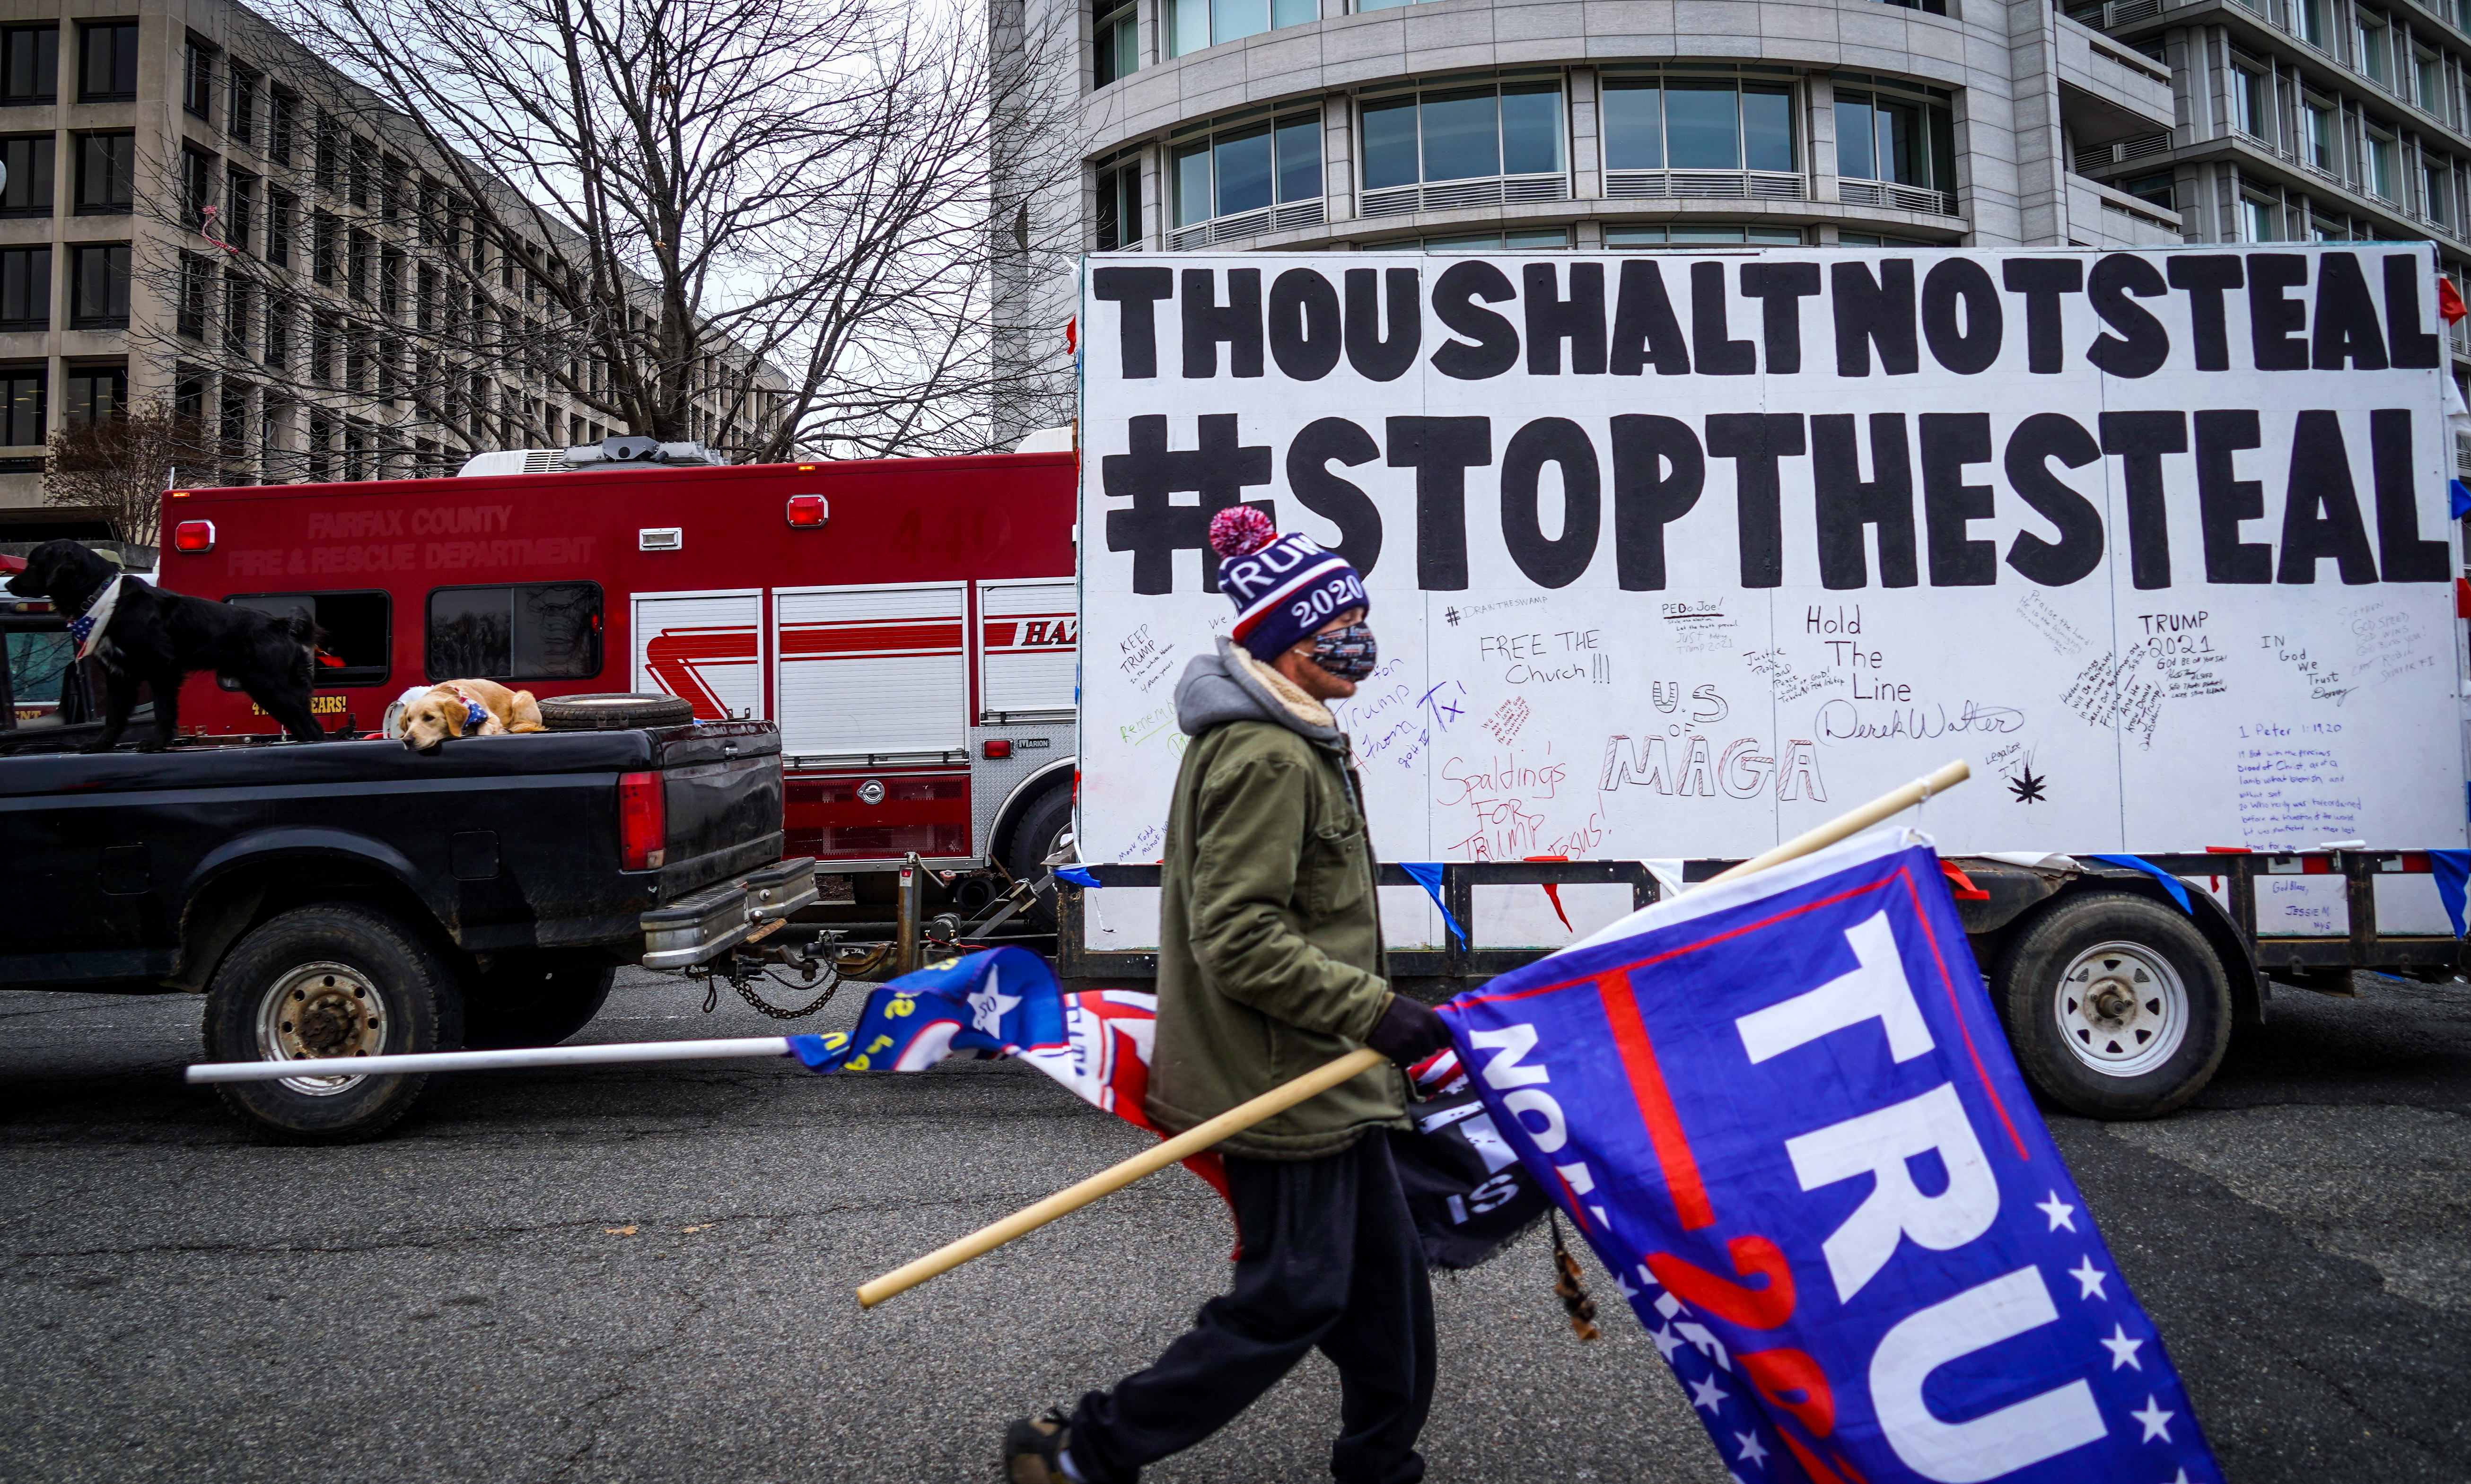 Trump Supporters Hold “Stop The Steal” Rally In DC Amid Ratification Of Presidential Election